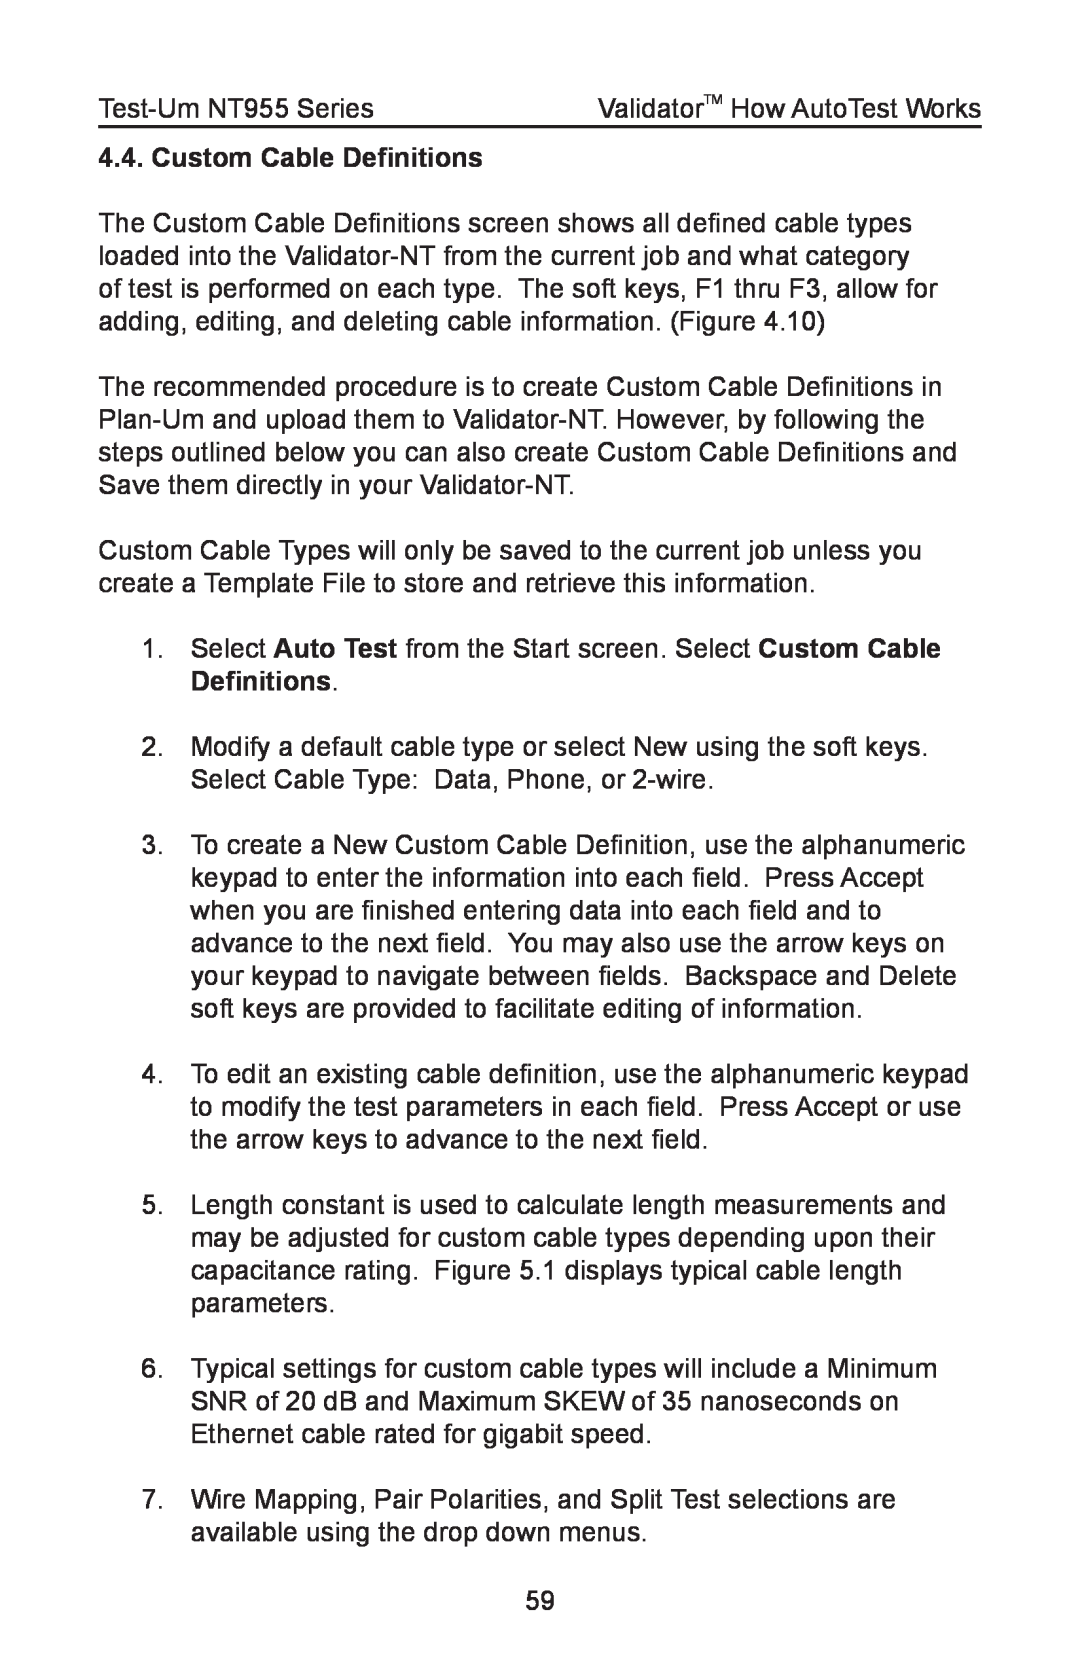 Test-Um NT955 operating instructions Custom Cable Definitions 